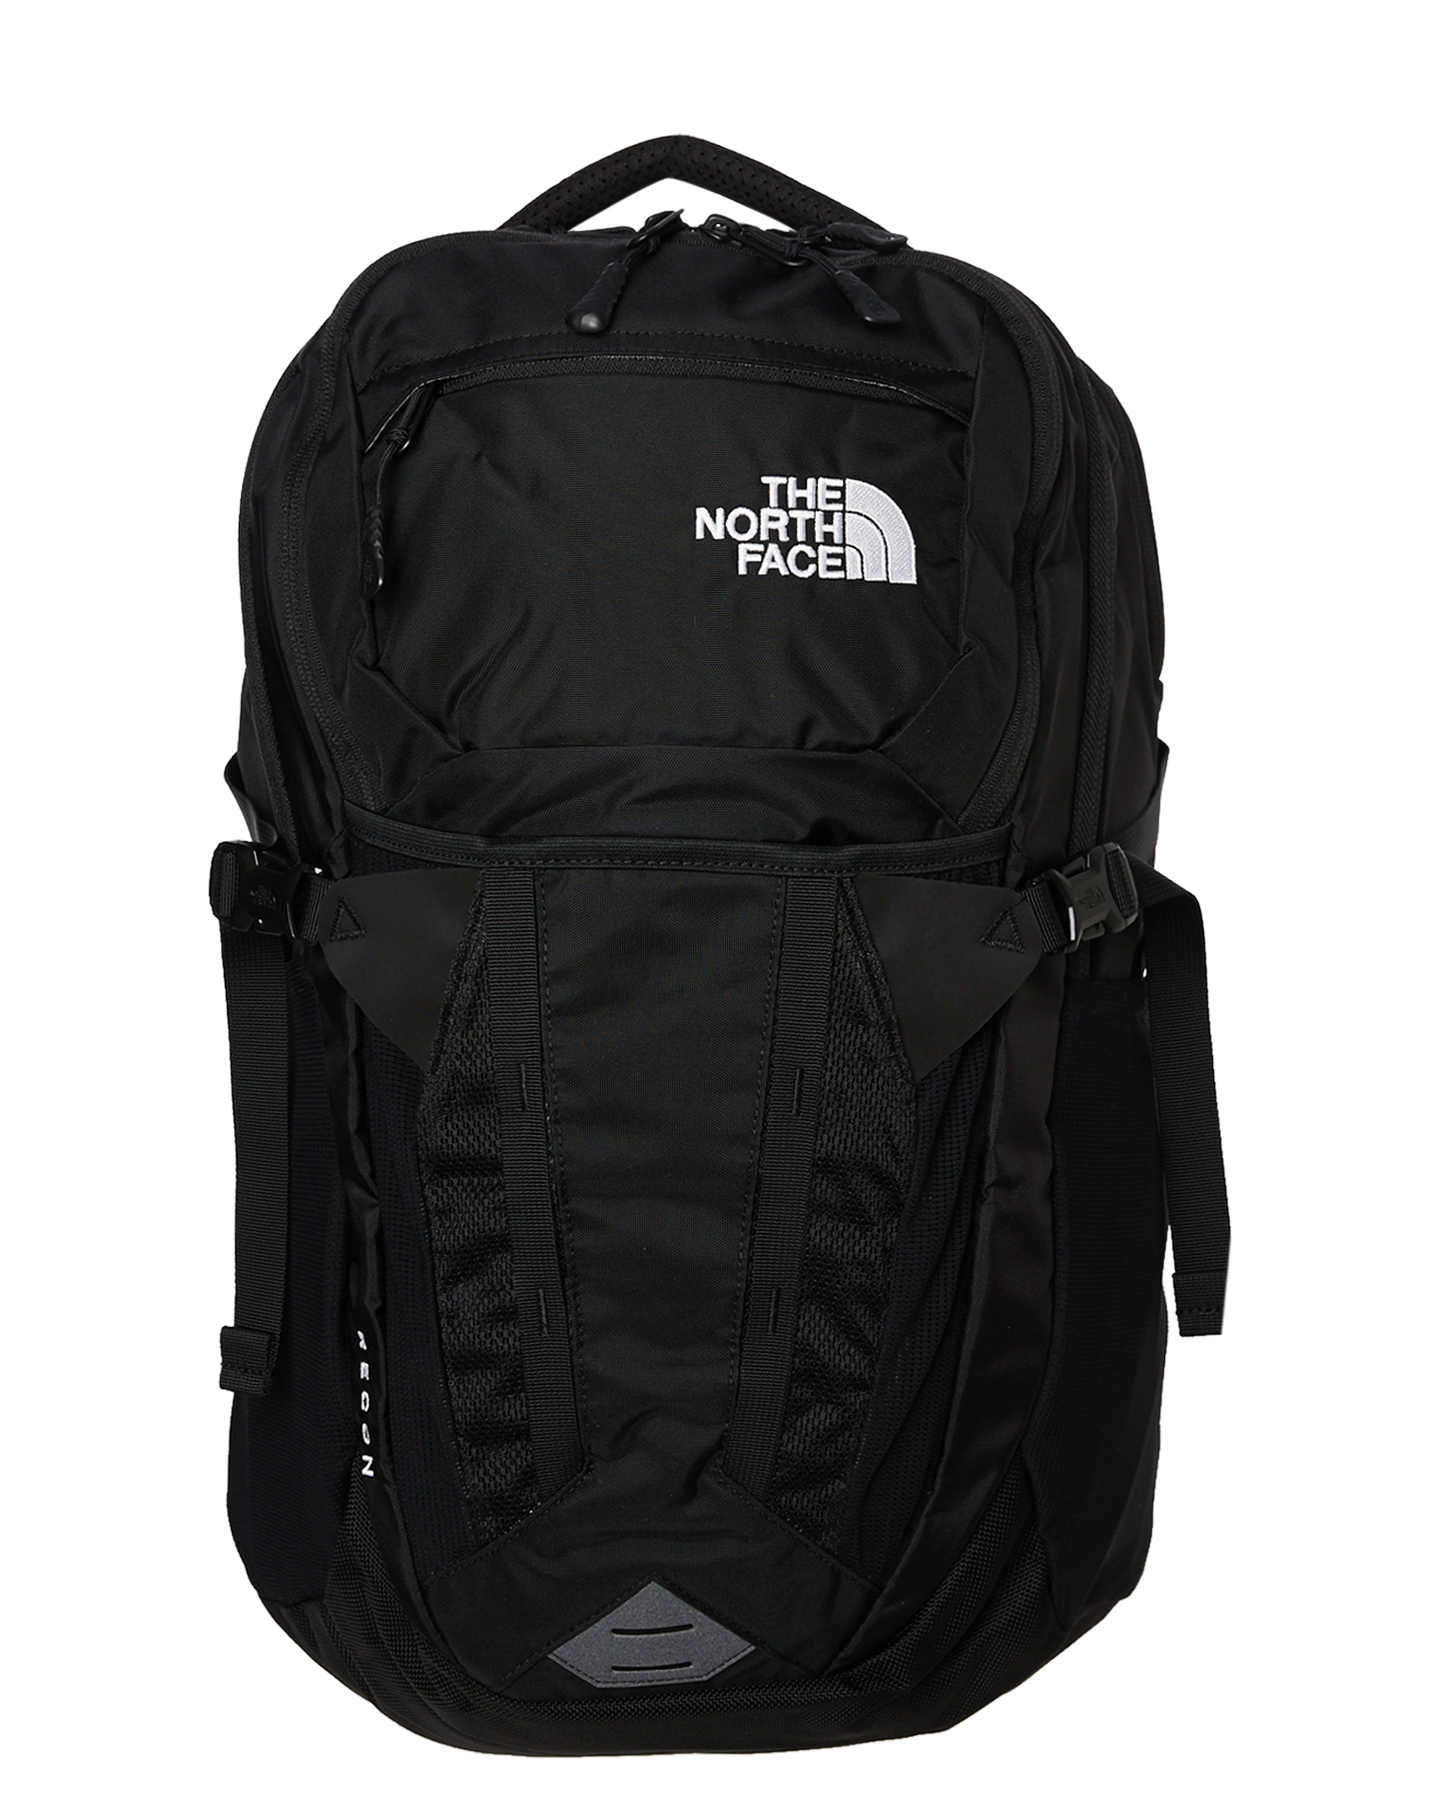 The North Face Recon 30L Backpack - Tnf 